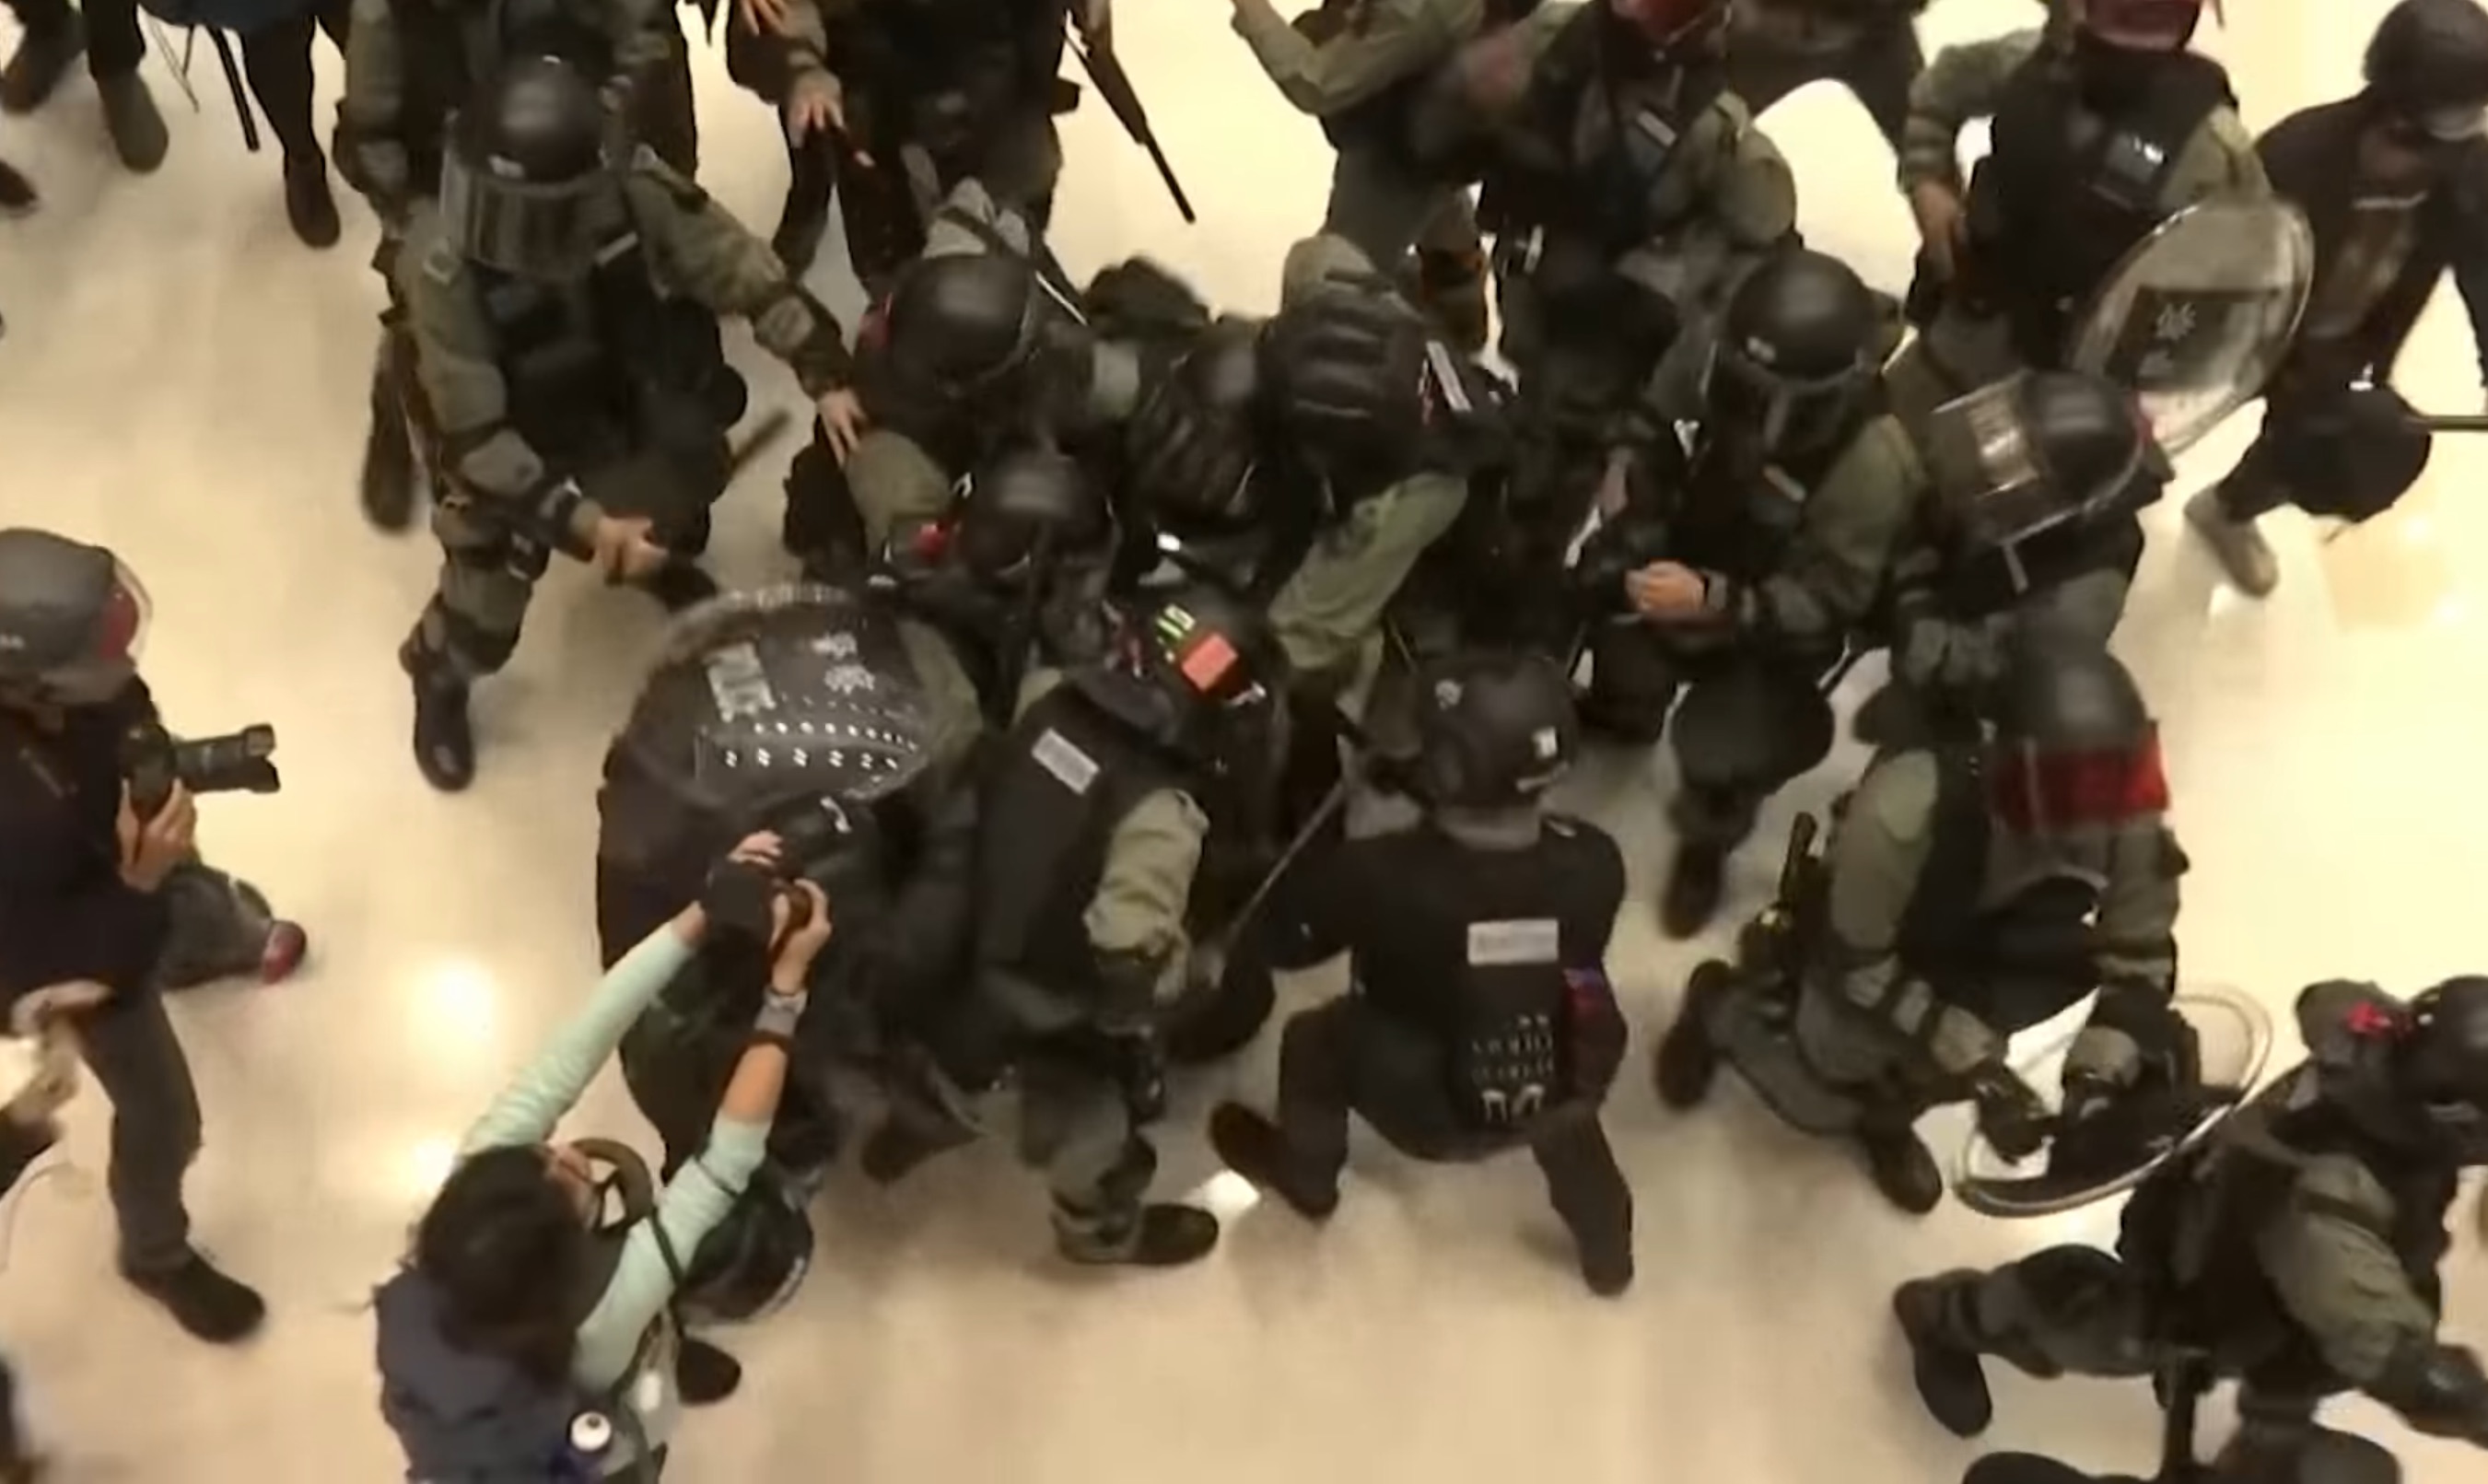 Riot police make an arrest during a scrum at the New Town Plaza shopping mall in Sha Tin on Dec. 15, 2019. Screengrab via YouTube.